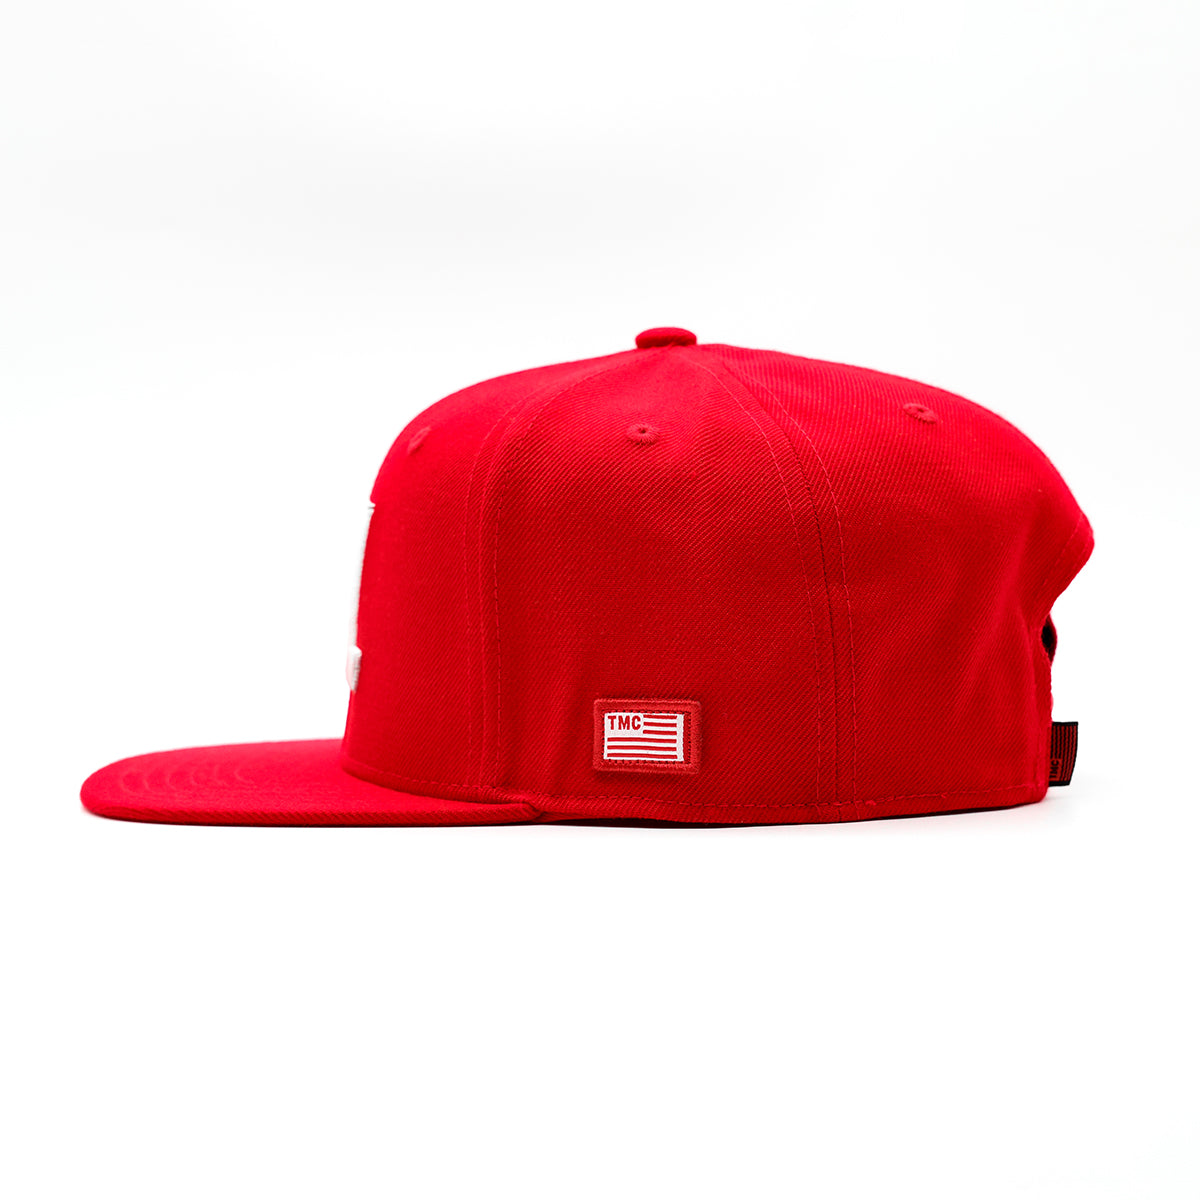 Victory Lap Limited Edition Snapback - Red/White - Side